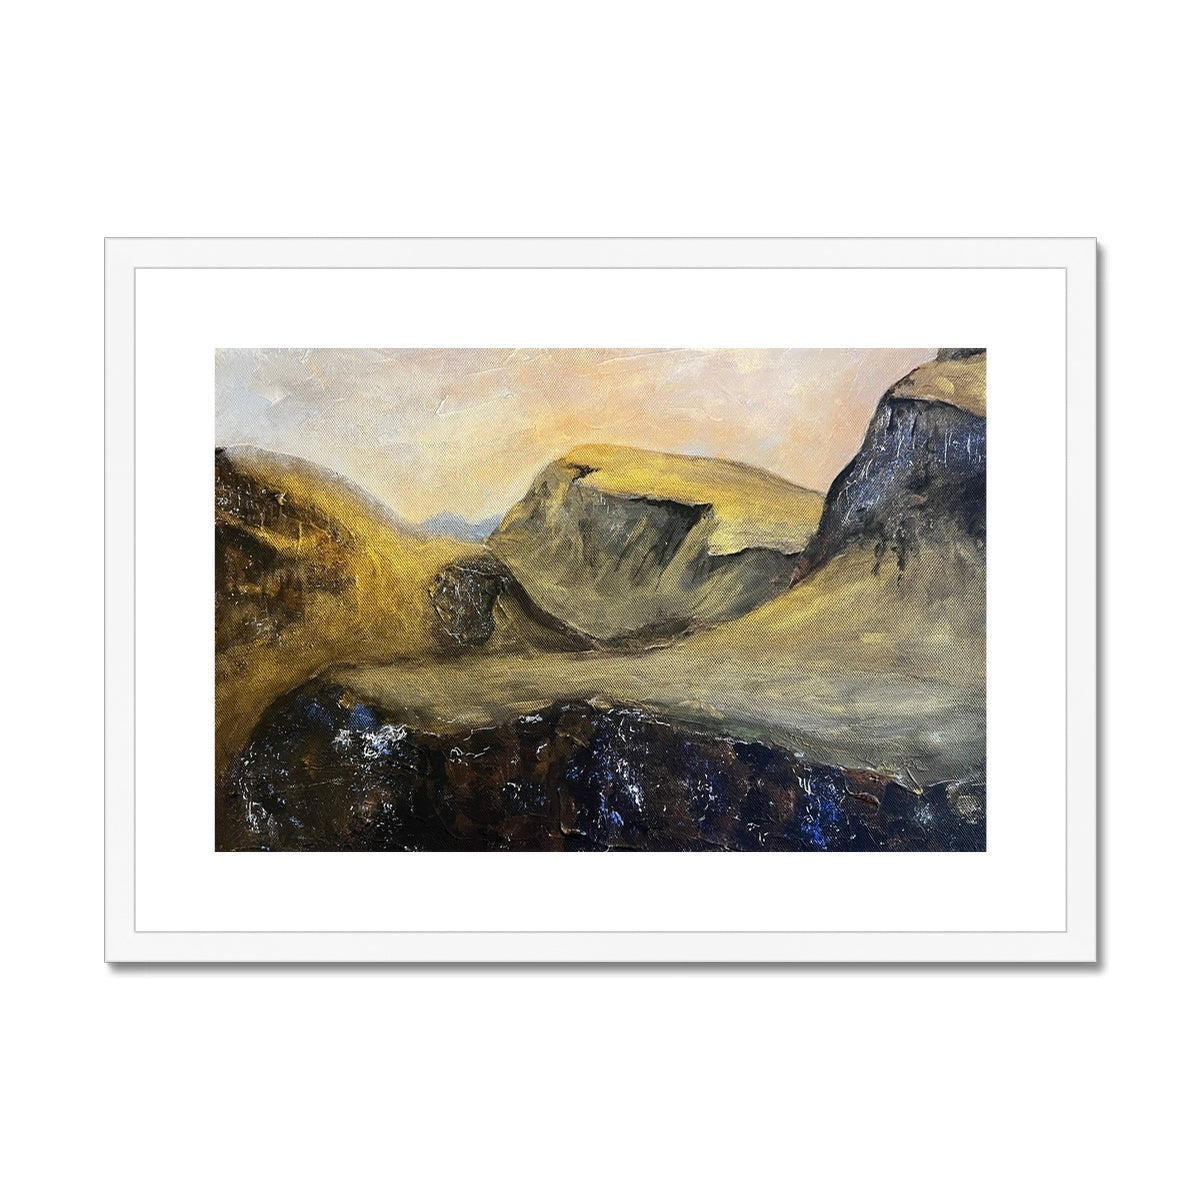 The Quiraing Skye Painting | Framed & Mounted Prints From Scotland-Framed & Mounted Prints-Skye Art Gallery-A2 Landscape-White Frame-Paintings, Prints, Homeware, Art Gifts From Scotland By Scottish Artist Kevin Hunter